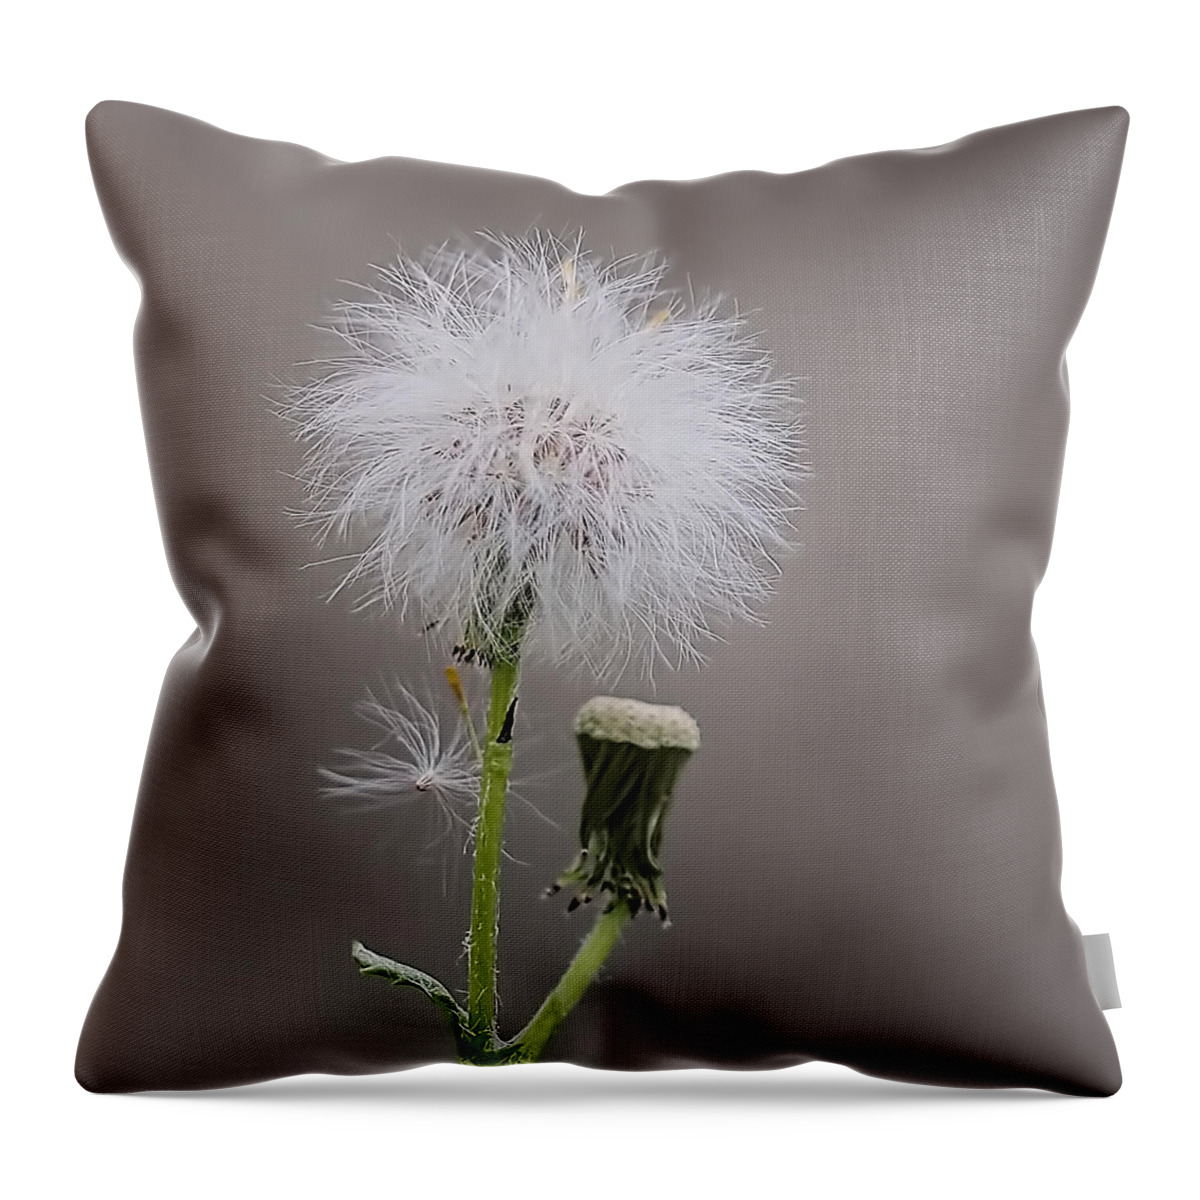  Throw Pillow featuring the photograph Dandelion Seed Head by Rona Black